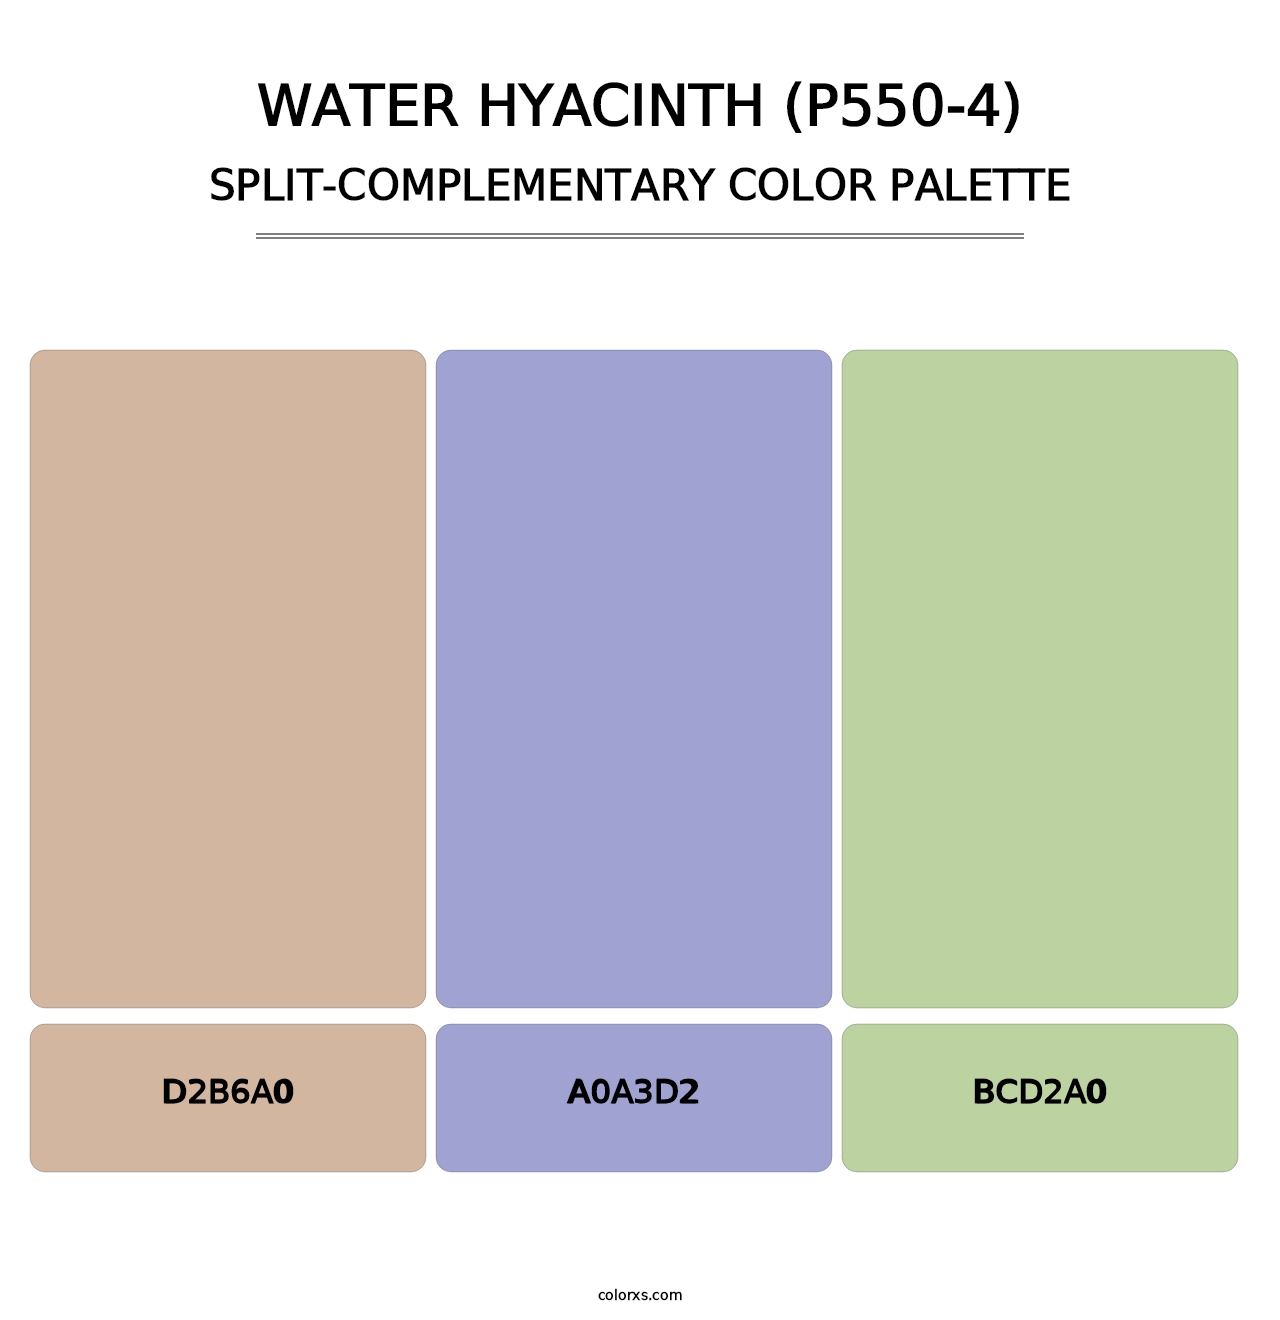 Water Hyacinth (P550-4) - Split-Complementary Color Palette